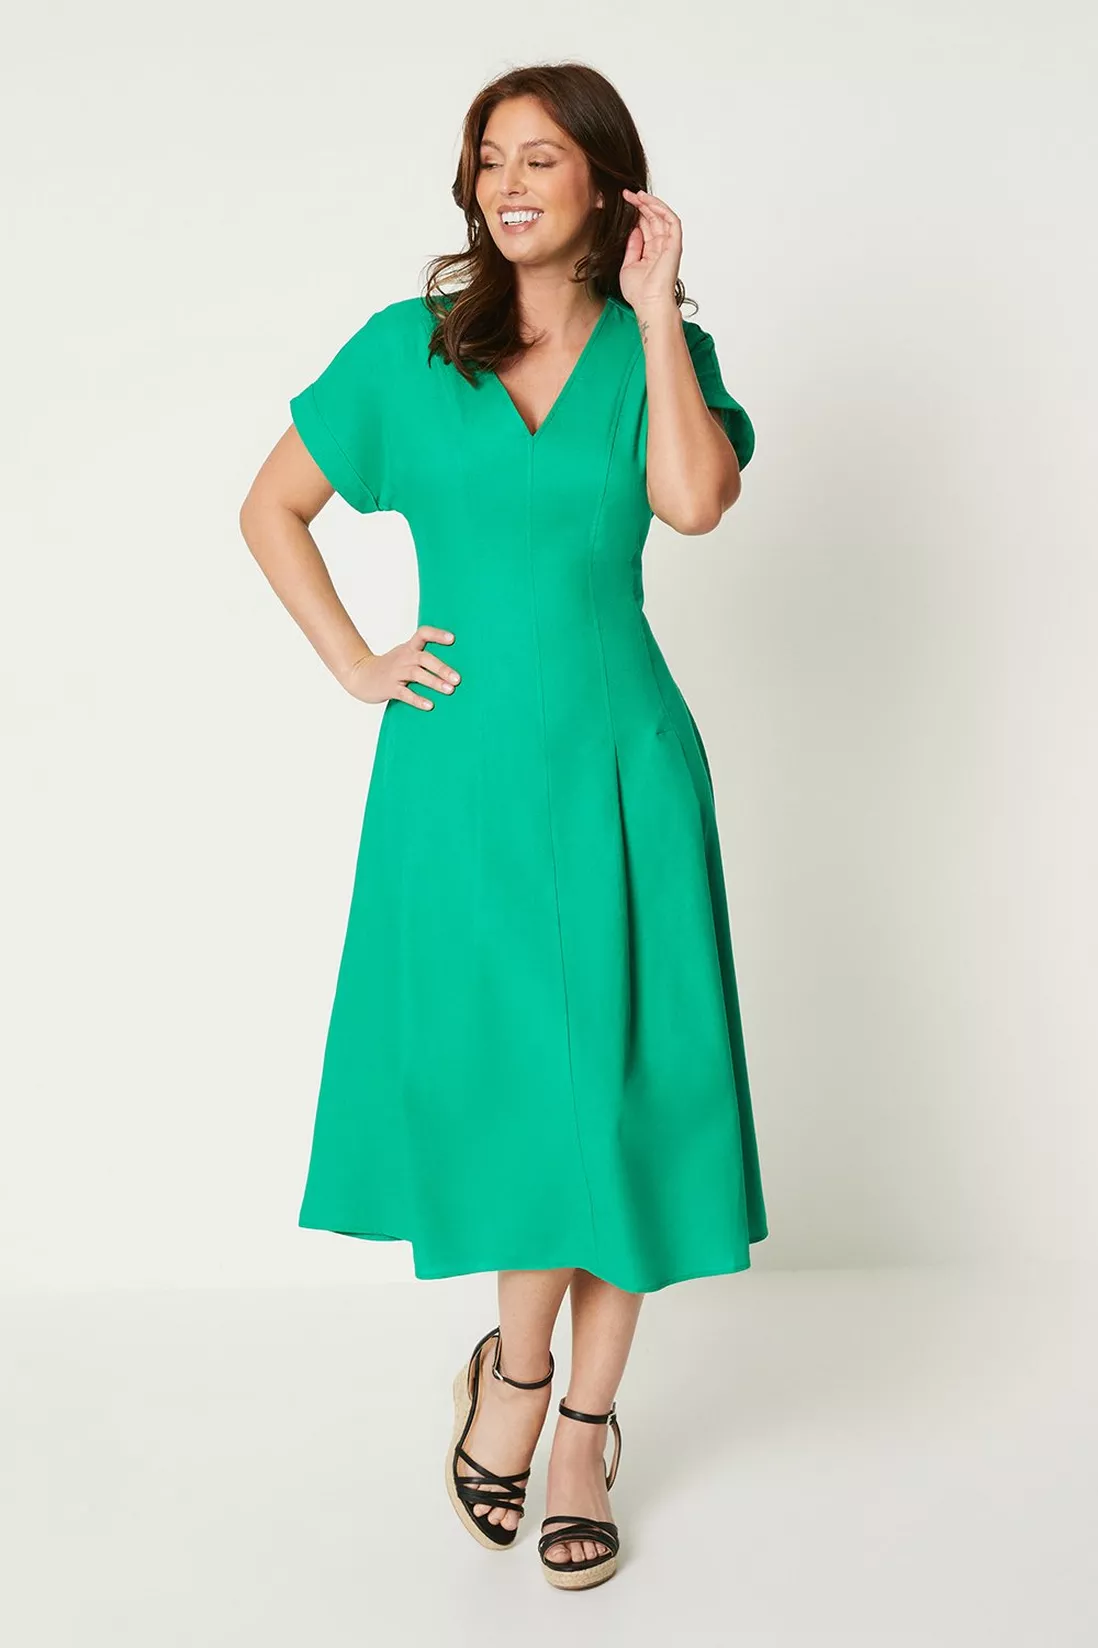 Discover the perfect blend of style, comfort, and professionalism with our guide to the best summer dresses for work. From airy linen blends to structured midis, find your summer wardrobe essentials for the modern working woman. Summer Dress Outfits | Summer Dress Outfit | Summer Dress Outfit Ideas | Summer Dress Idea | Summer Dresses Idea | Summer Dresses For work | Summer Dress For Work | Summer Dress Cute | Work Outfit Women | Business Professional Outfit | Corporate Outfit